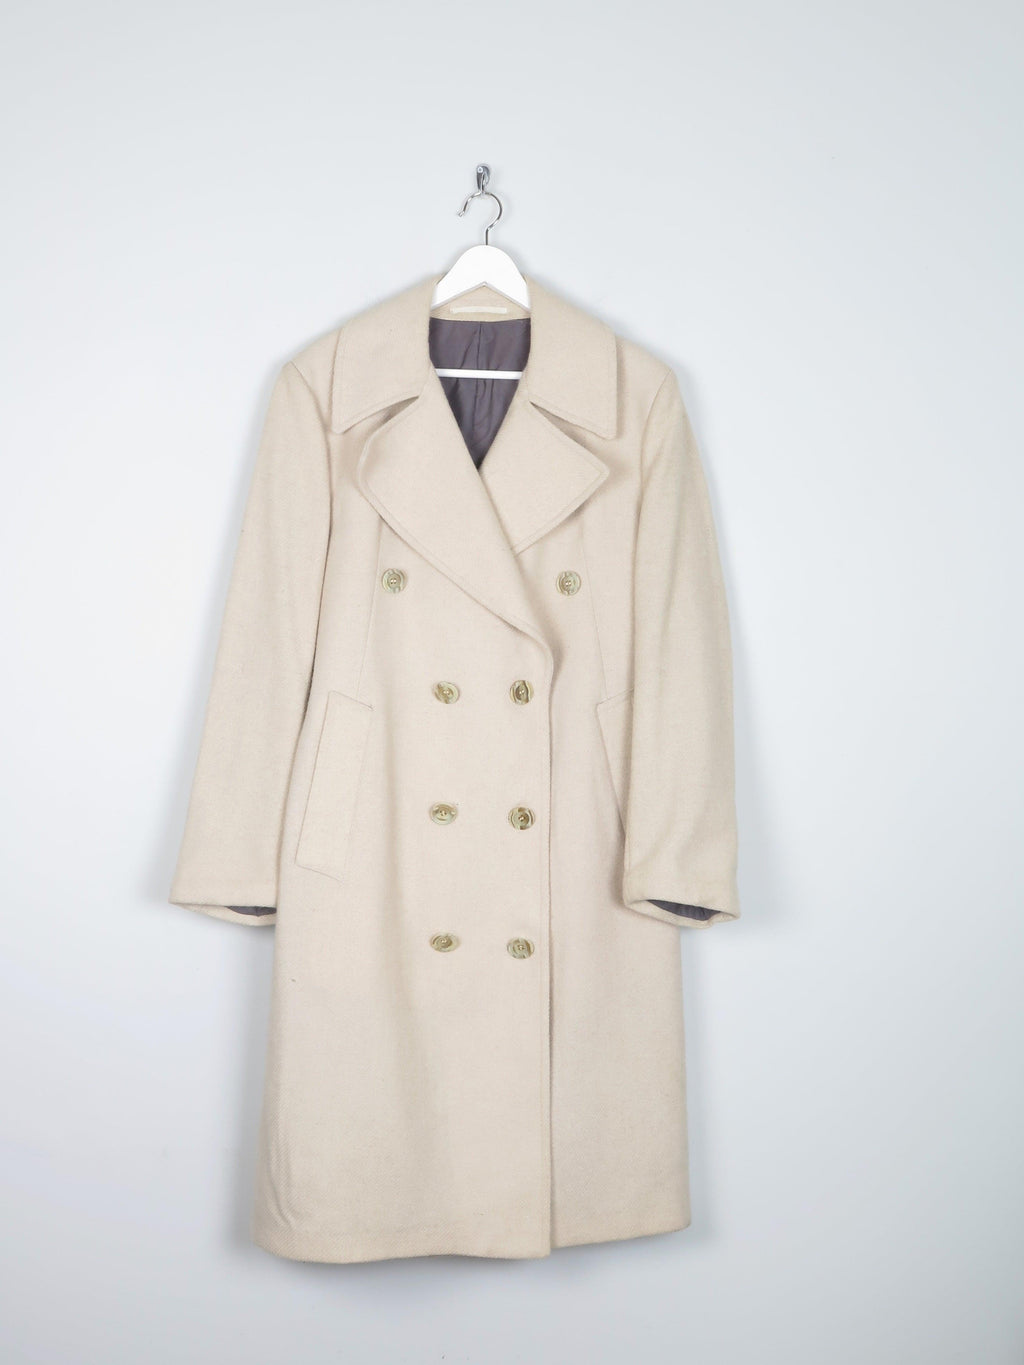 Men's 1970s Double Breasted Cream Tweed Coat With Belt 44" {Large} - The Harlequin